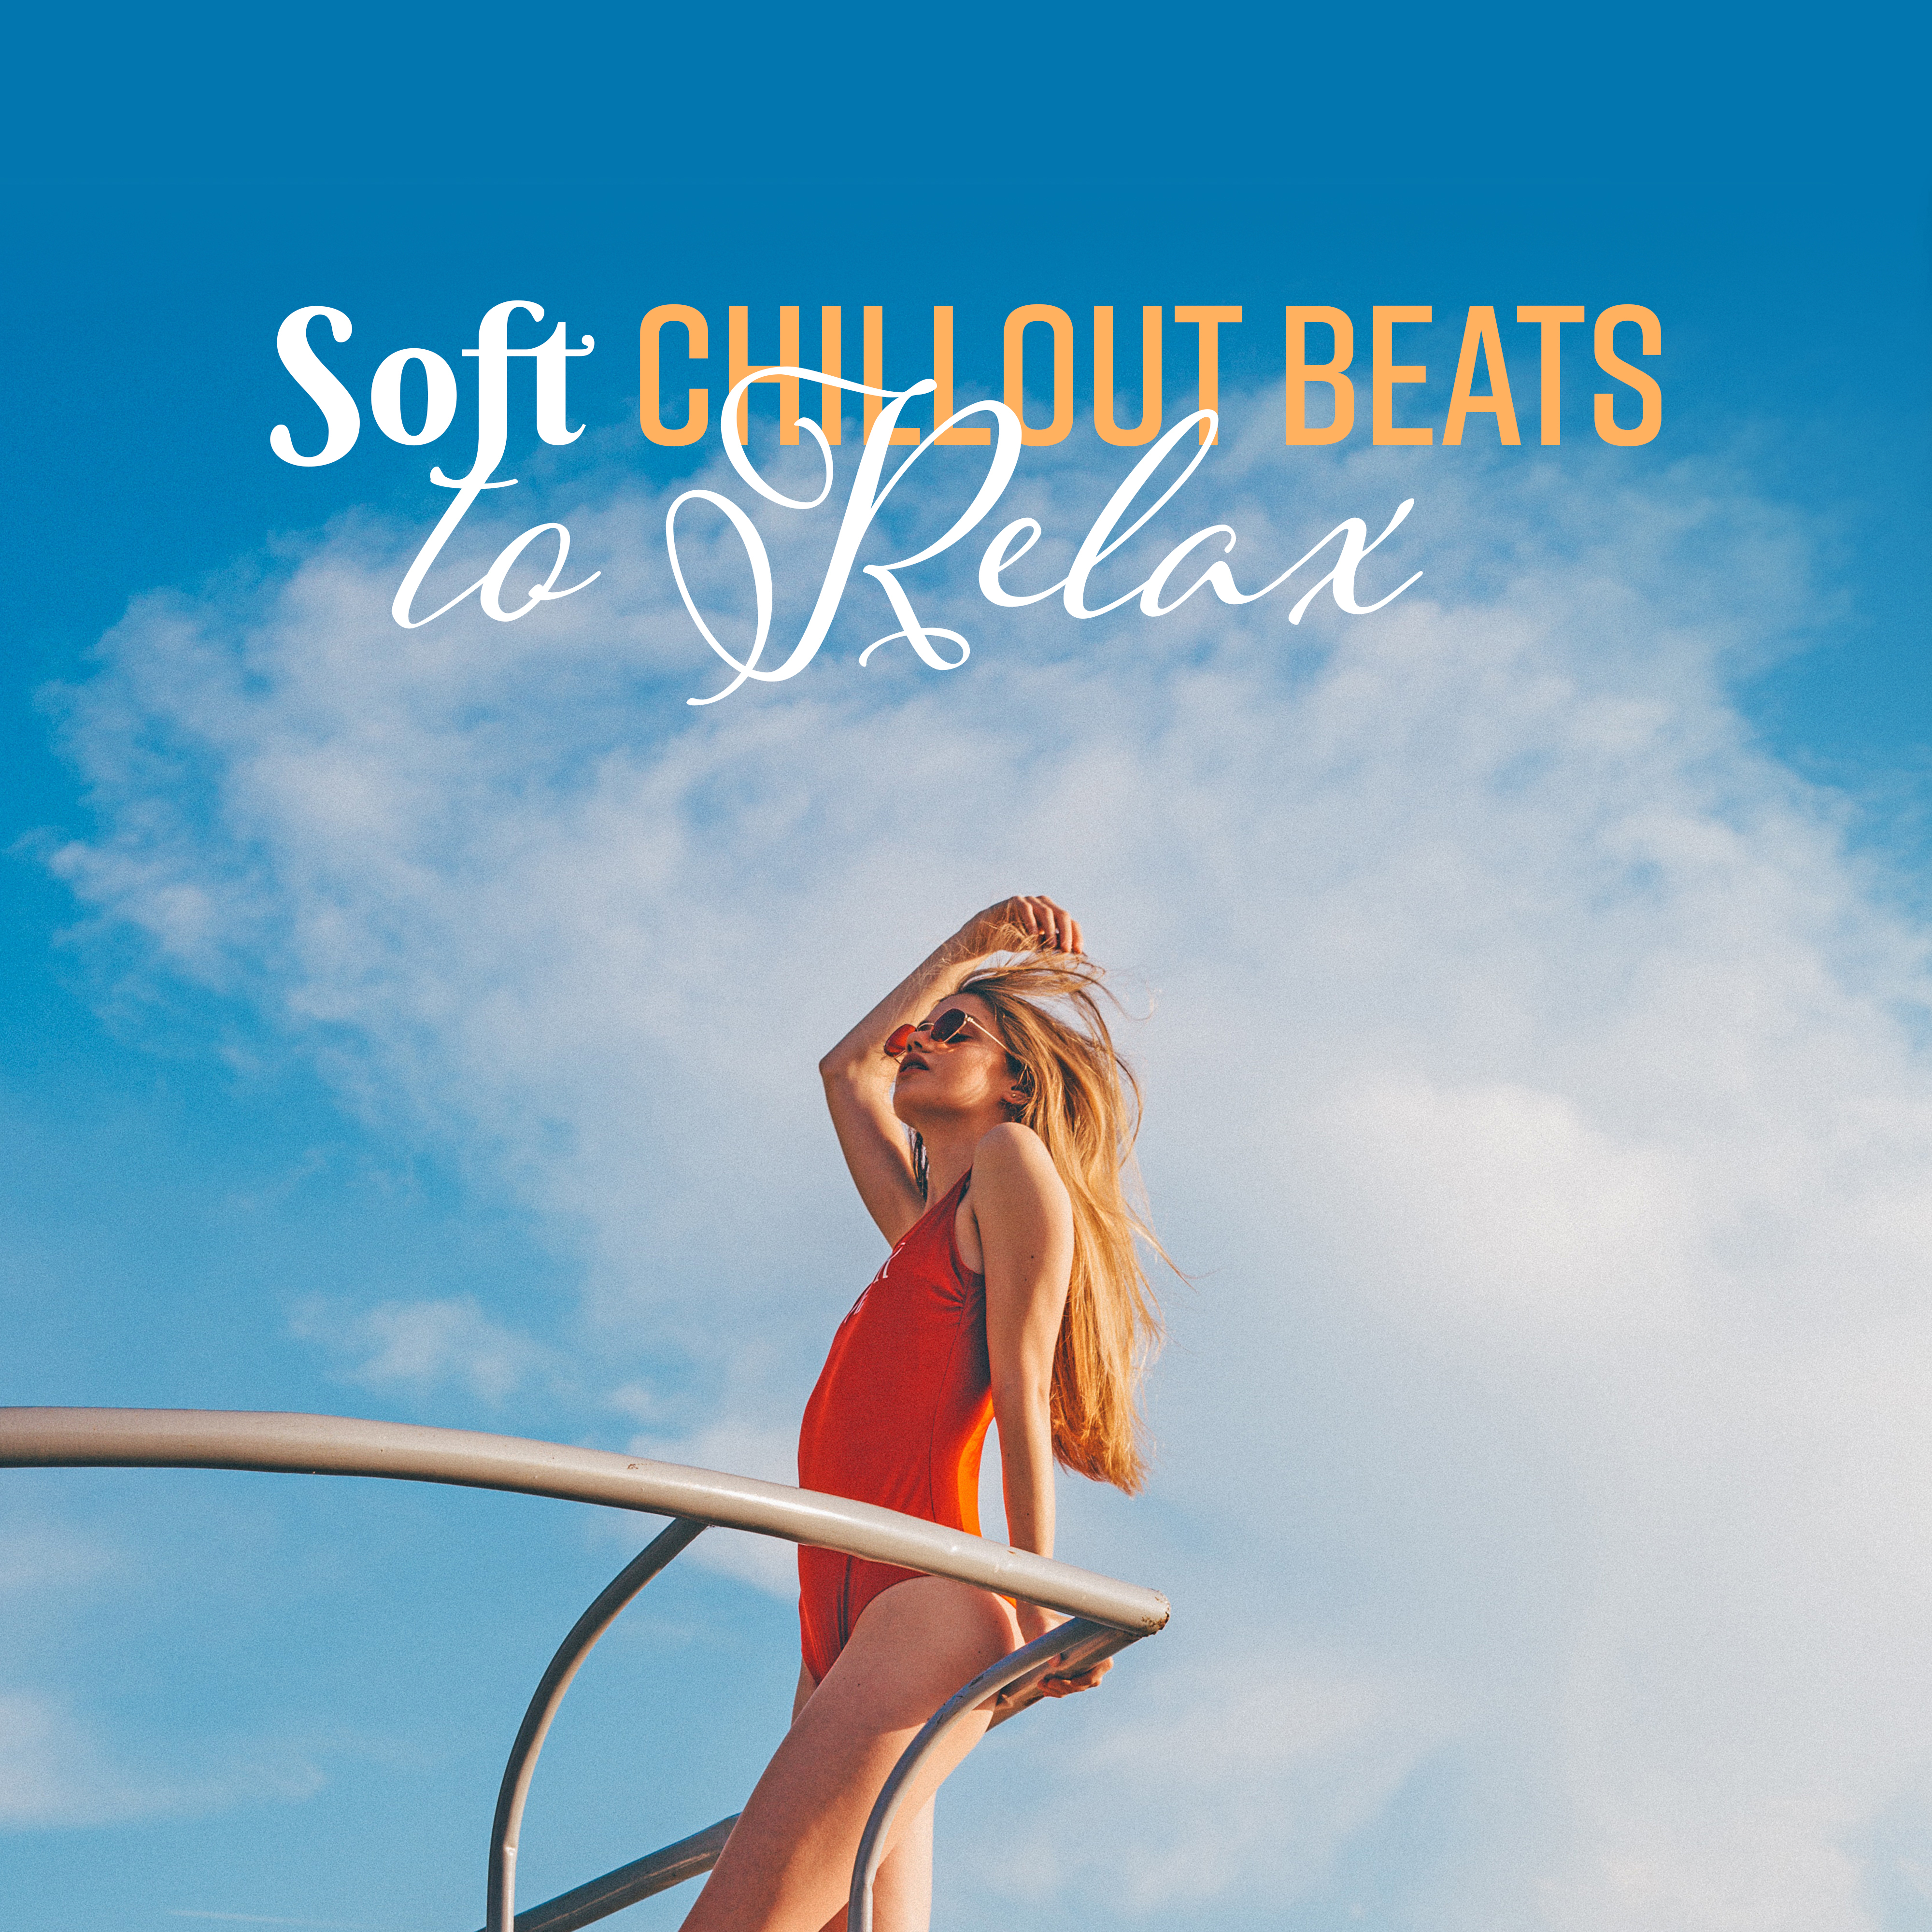 Soft Chillout Beats to Relax